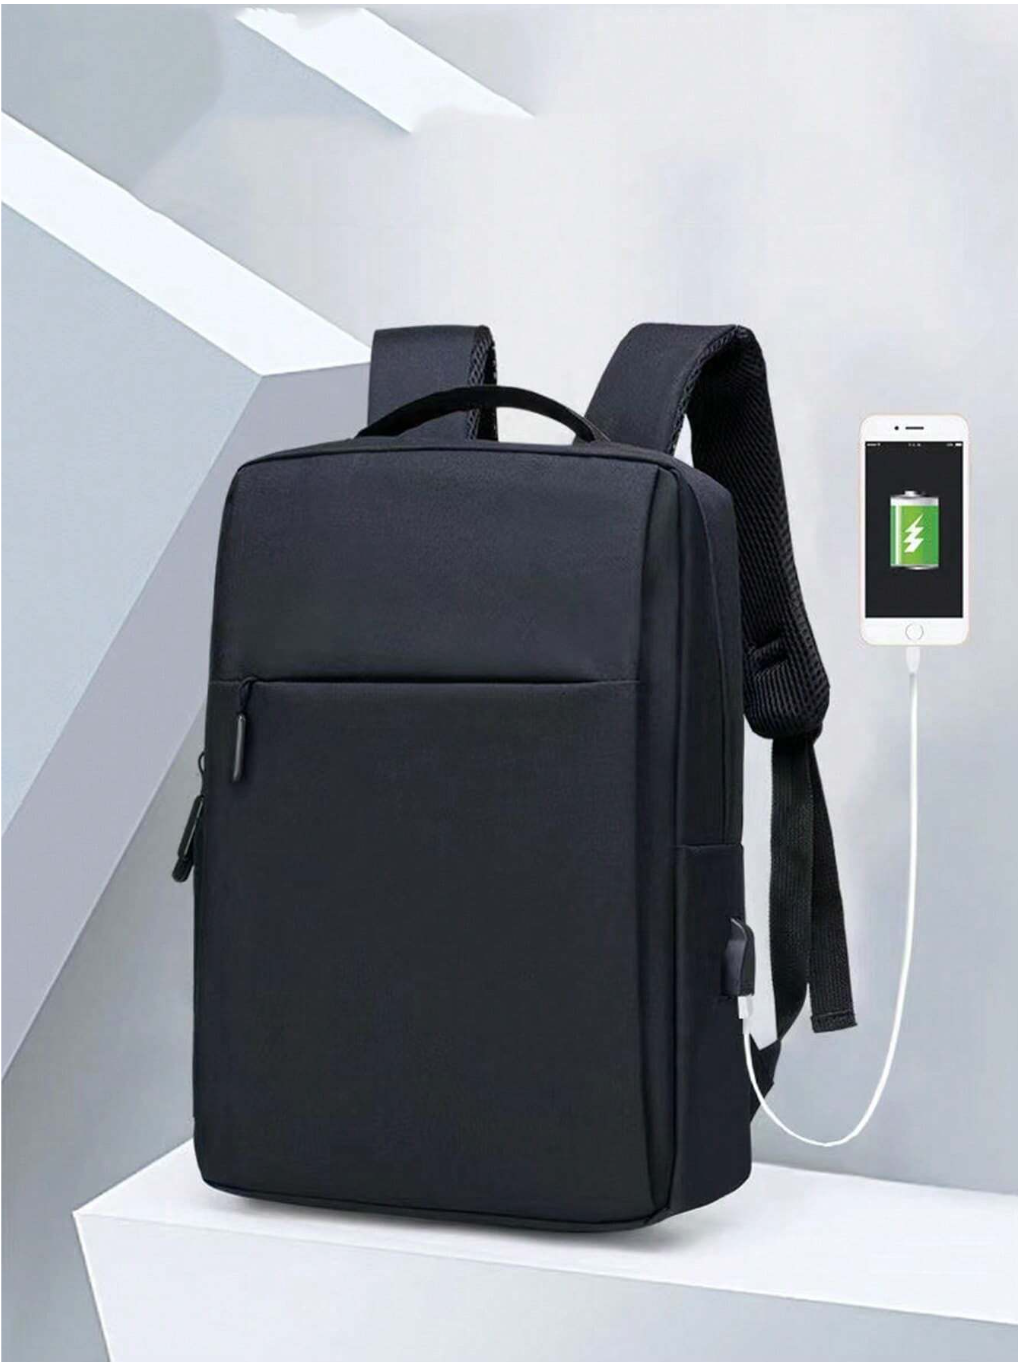 Ultimate Travel Companion: 16-inch Multifunctional Laptop Backpack – Stylish, Spacious, and Unisex!